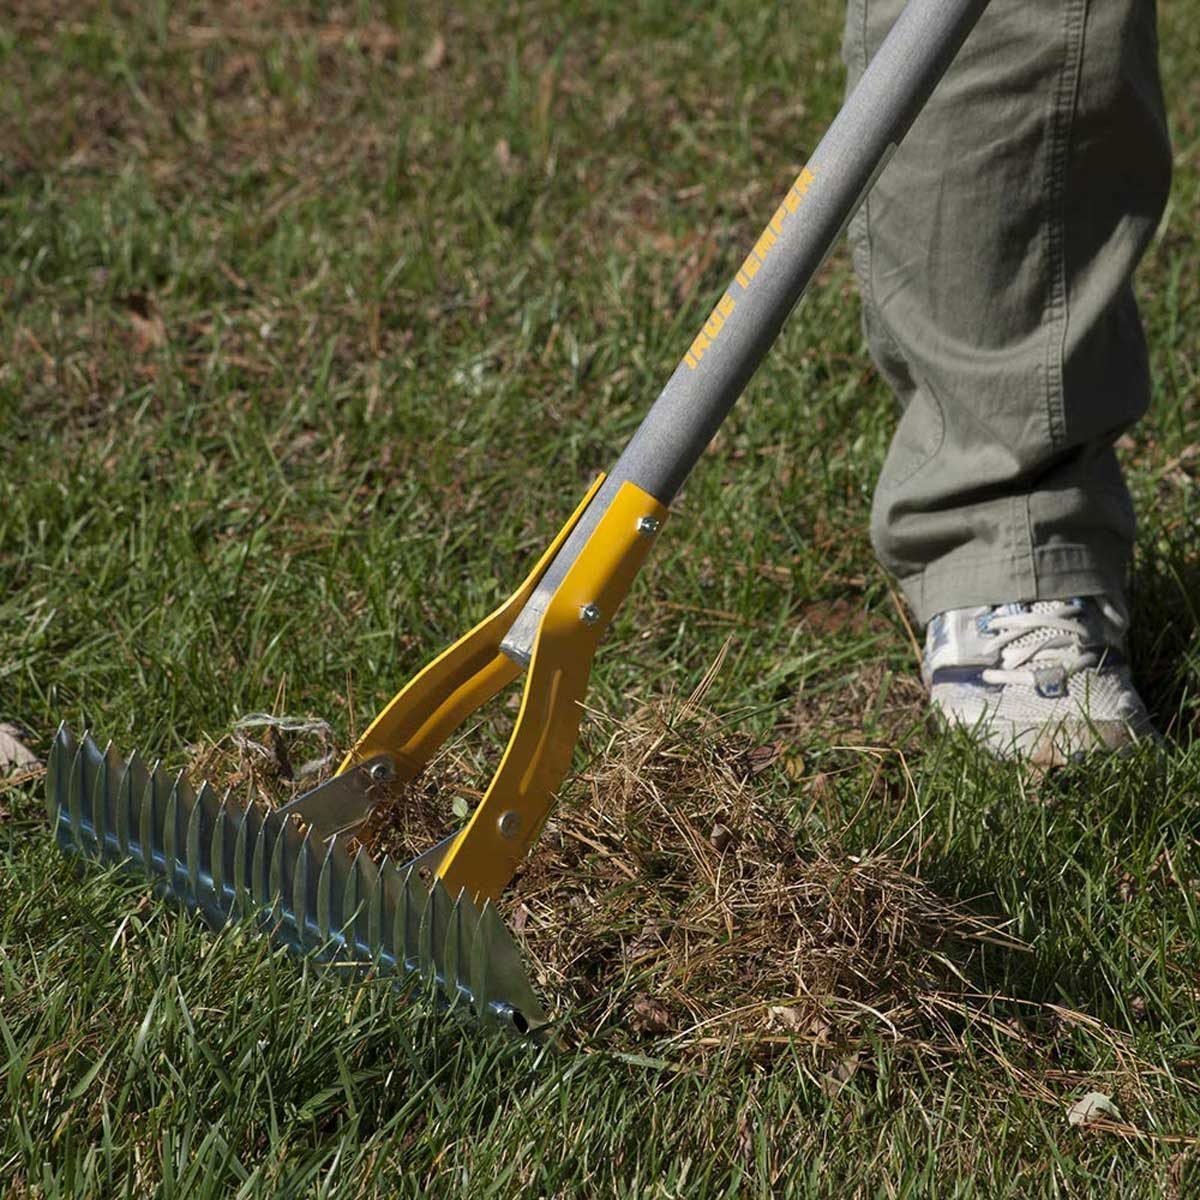 How To Dethatch A Lawn Quickly : Dethatching St Augustine Grass Best ...